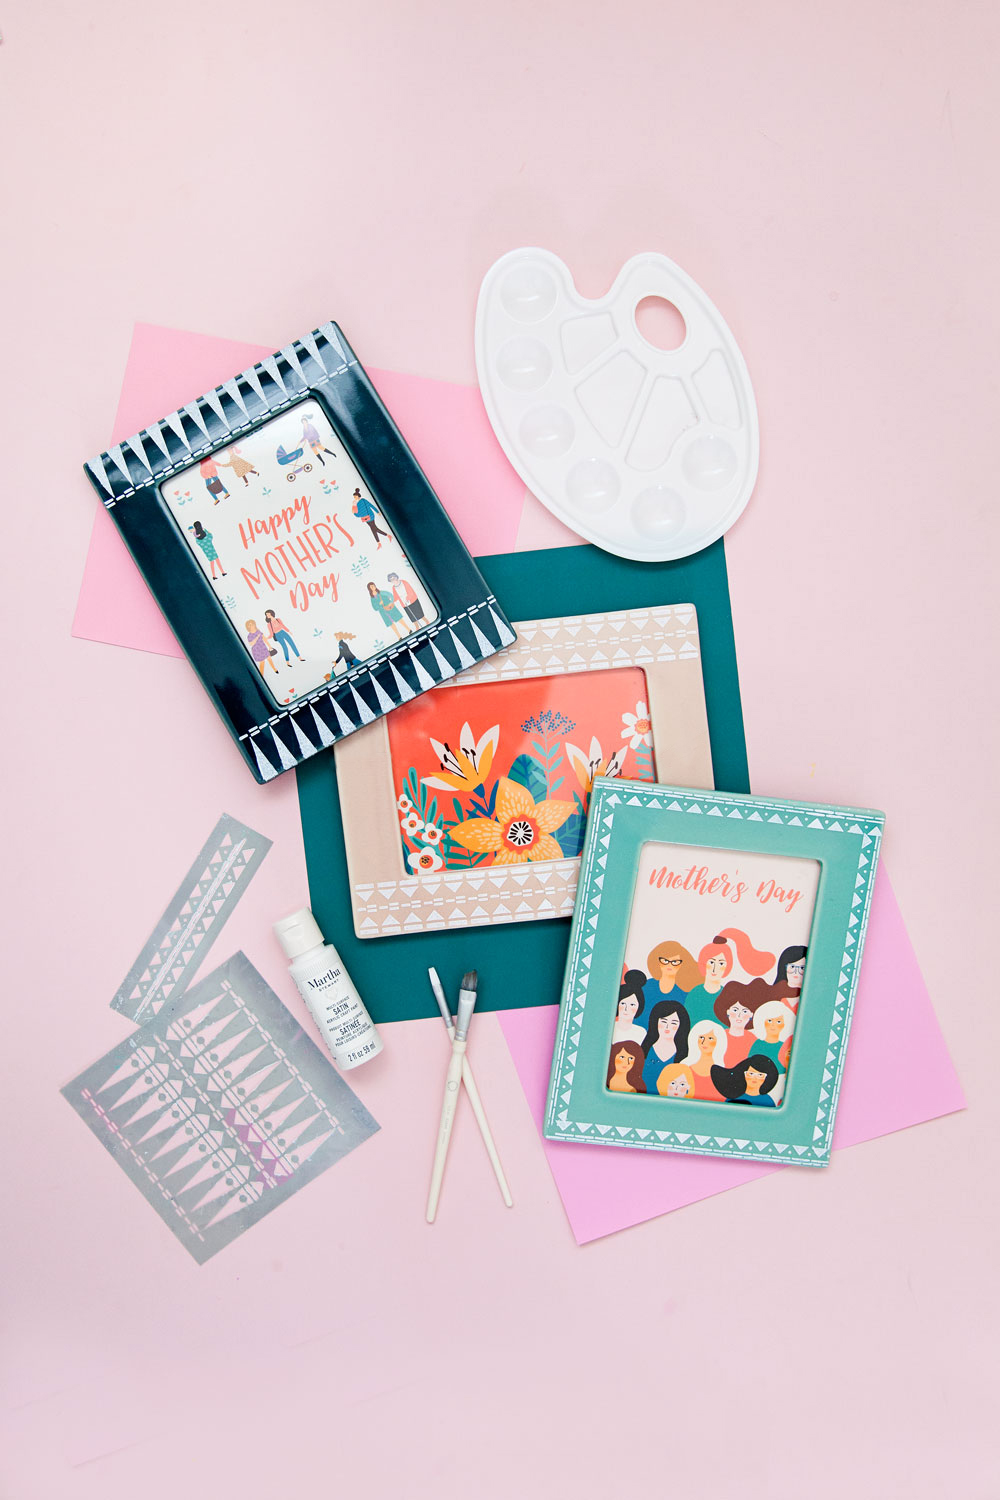 Make something meaningful this Mother's day with these DIY stenciled frames. So simple to make and perfect for holding any memory or keepsake.